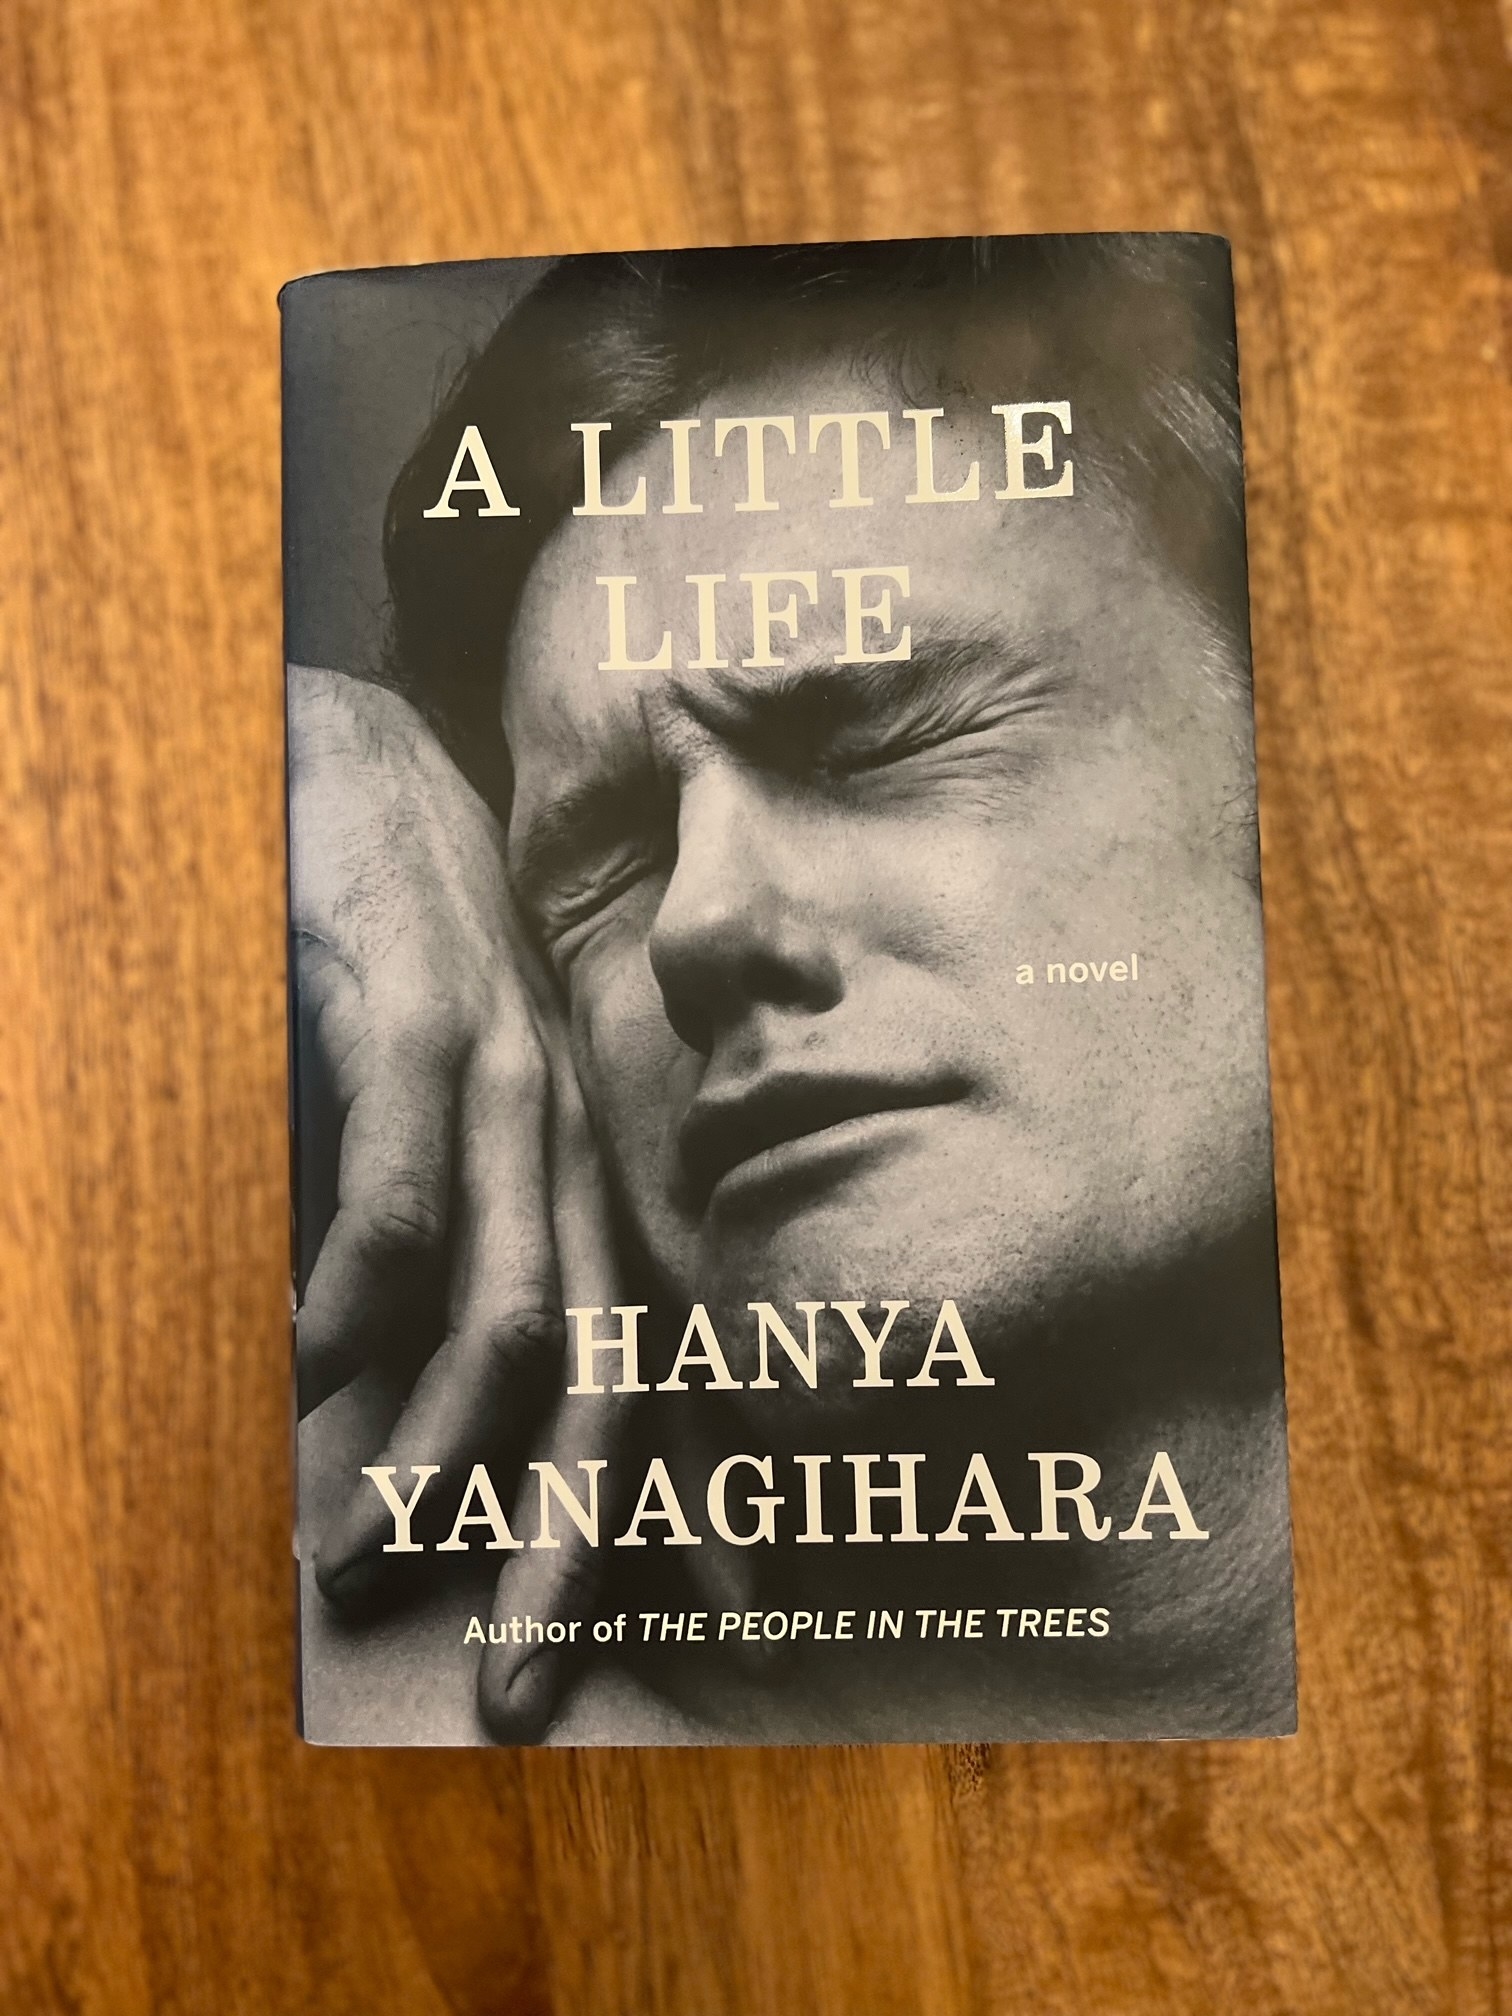 The cover of &quot;A Little Life&quot; by Hanya Yanagihara.